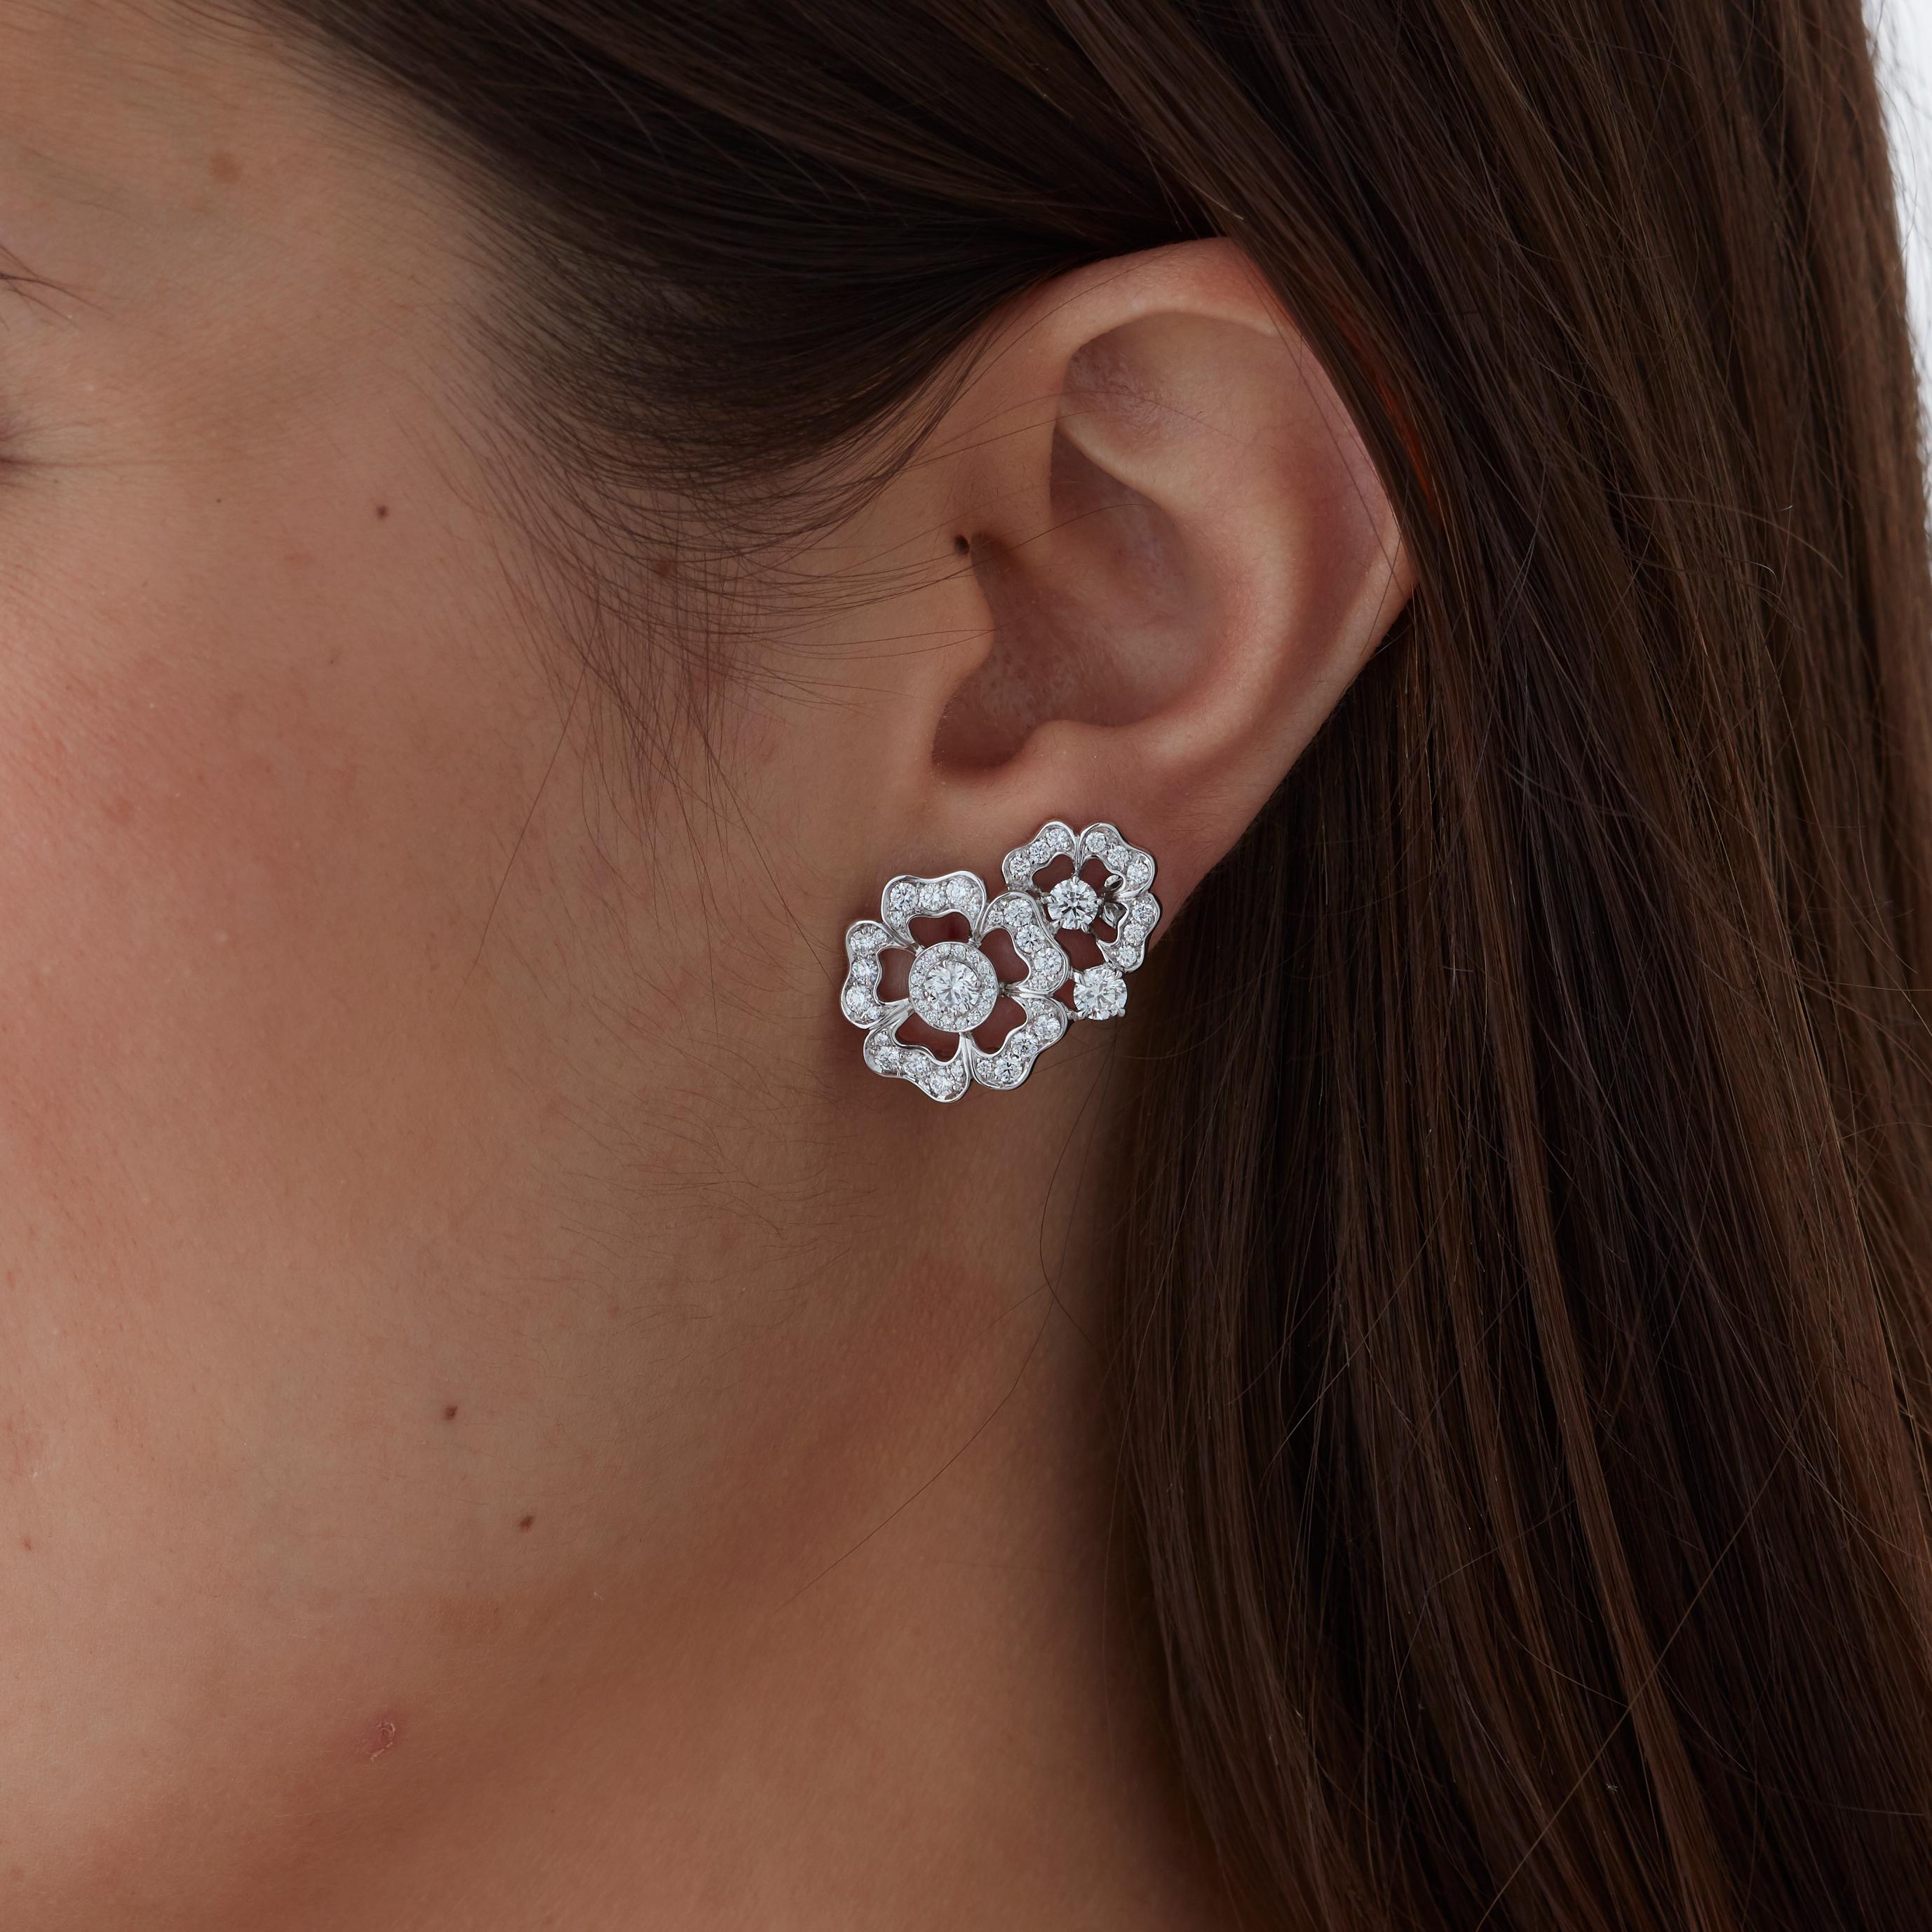 A House of Garrard pair of 18 karat white gold ear climbers from the 'Tudor Rose Petal' collection, set with round white diamonds.

112 round white diamonds weighing: 2.09cts                                                                           